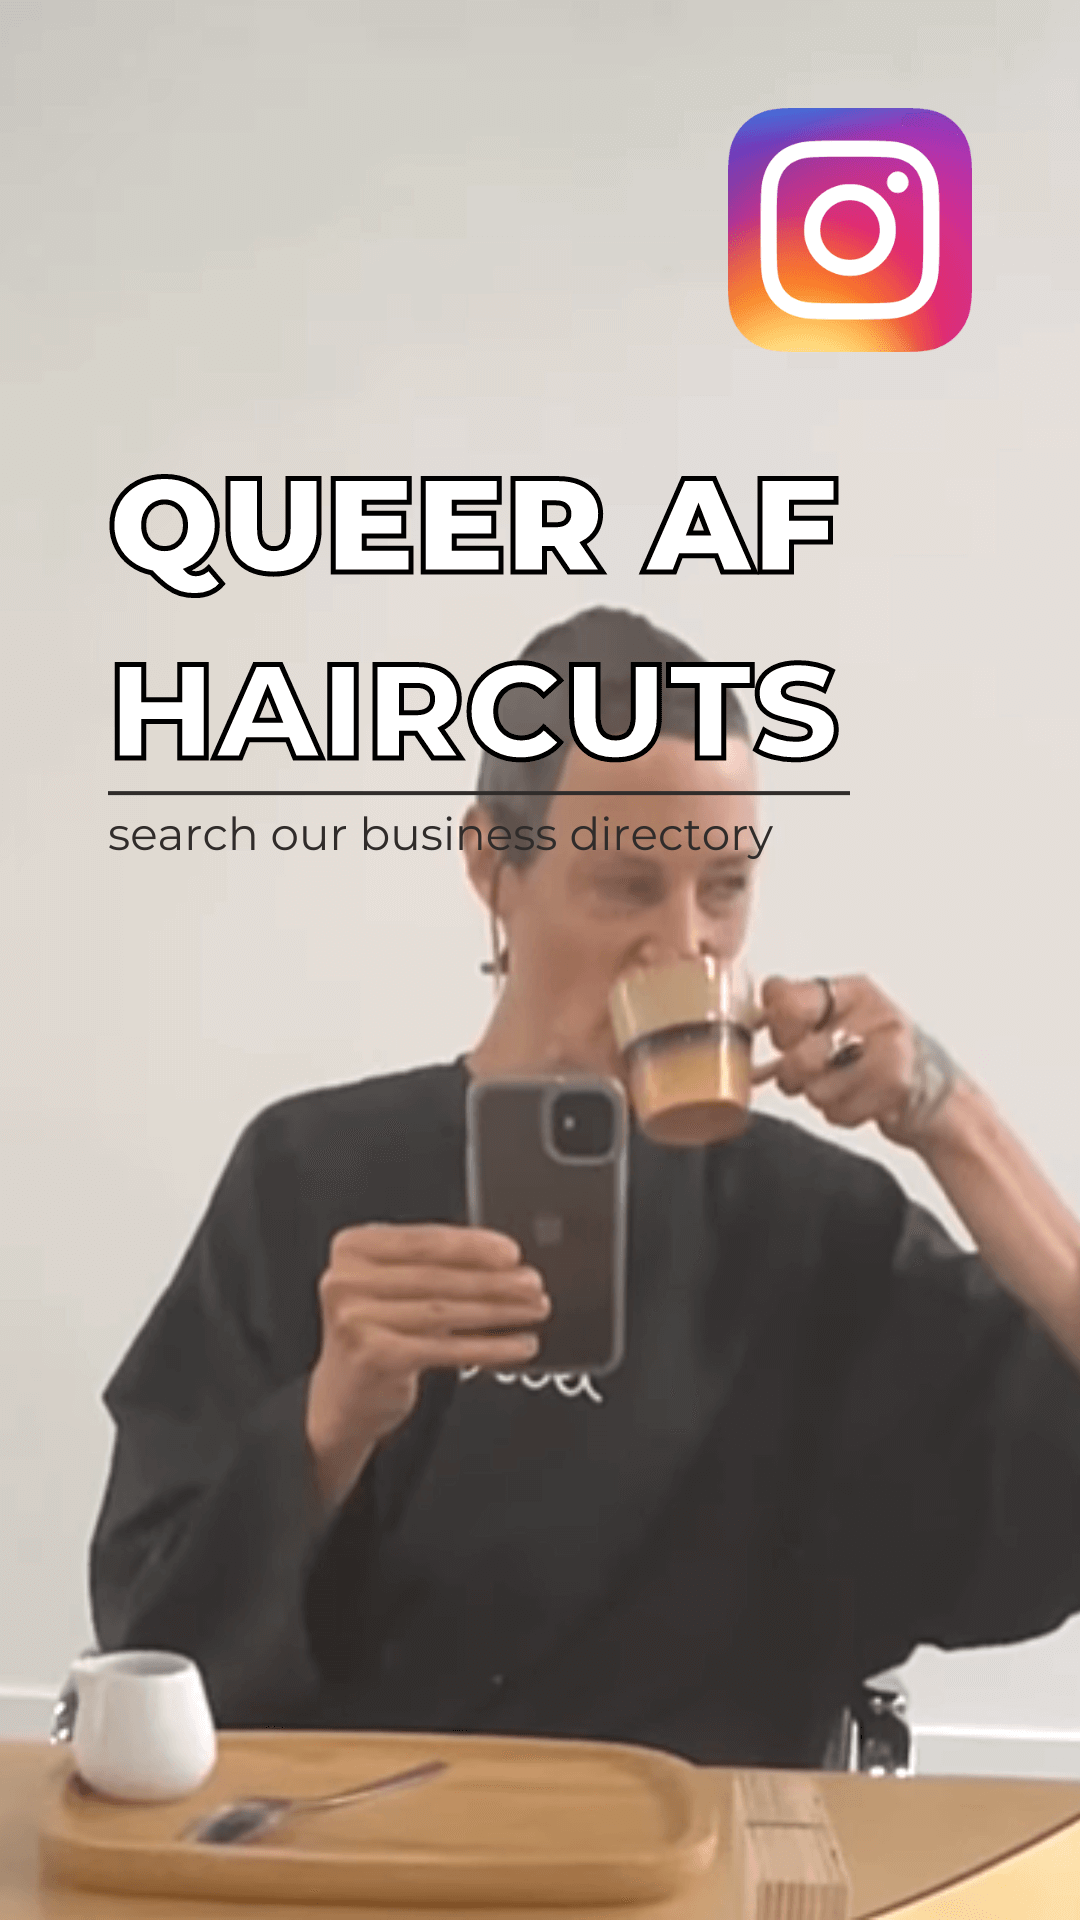 Intersex advocate Rae sharing on Instagram their Queer AF non-binary haircut experience at a salon in London – aiming to promote awareness of gender euphoria versus gender dysphoria